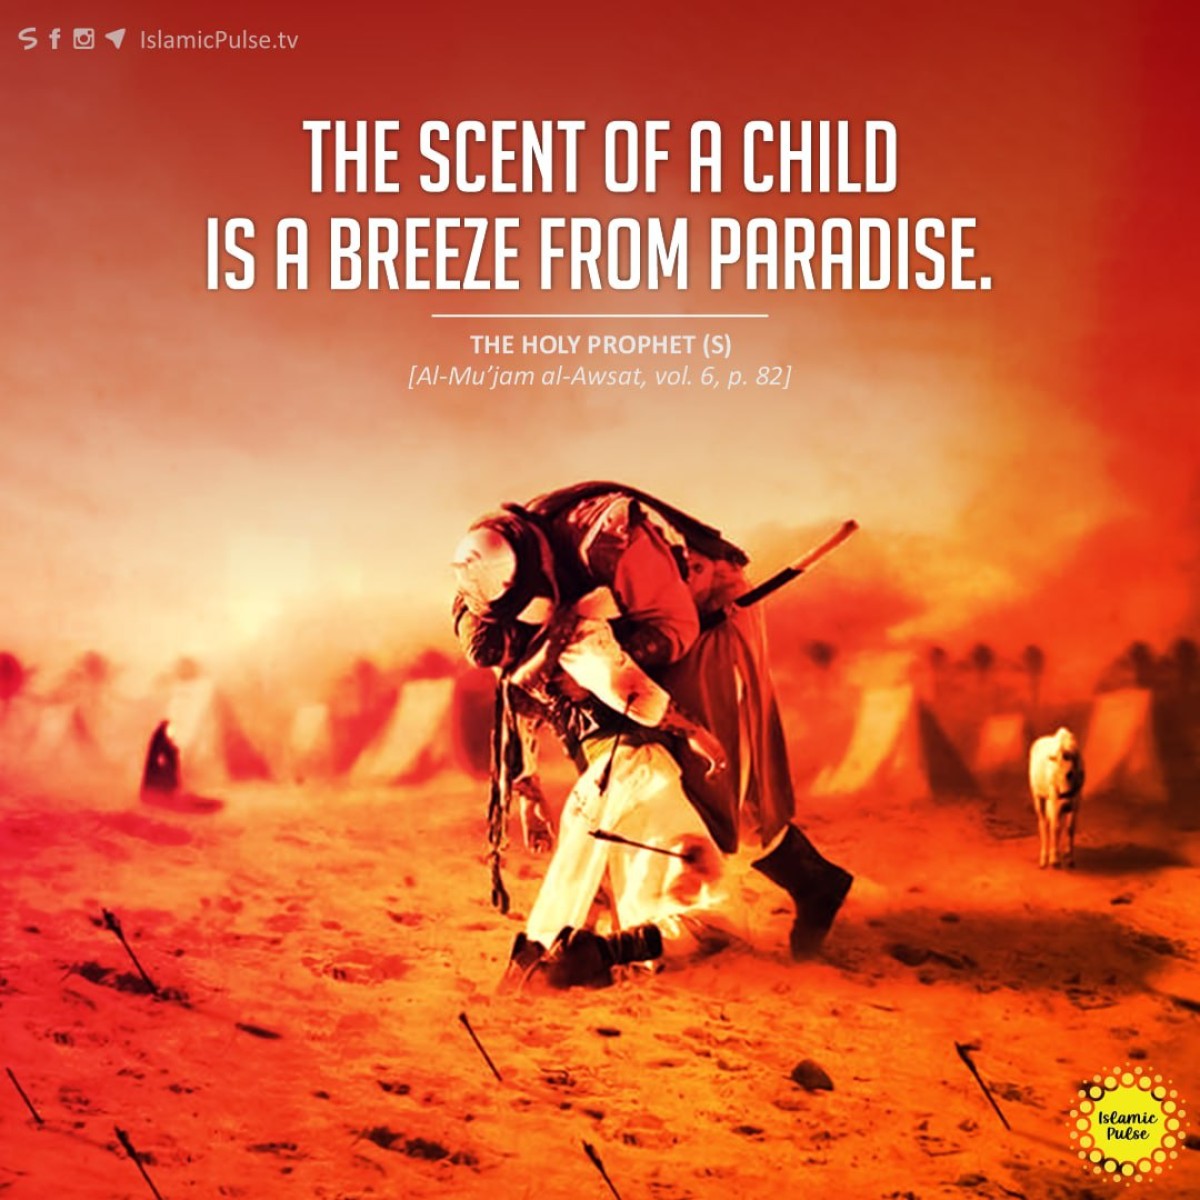 "The scent of a child is a breeze from Paradise."